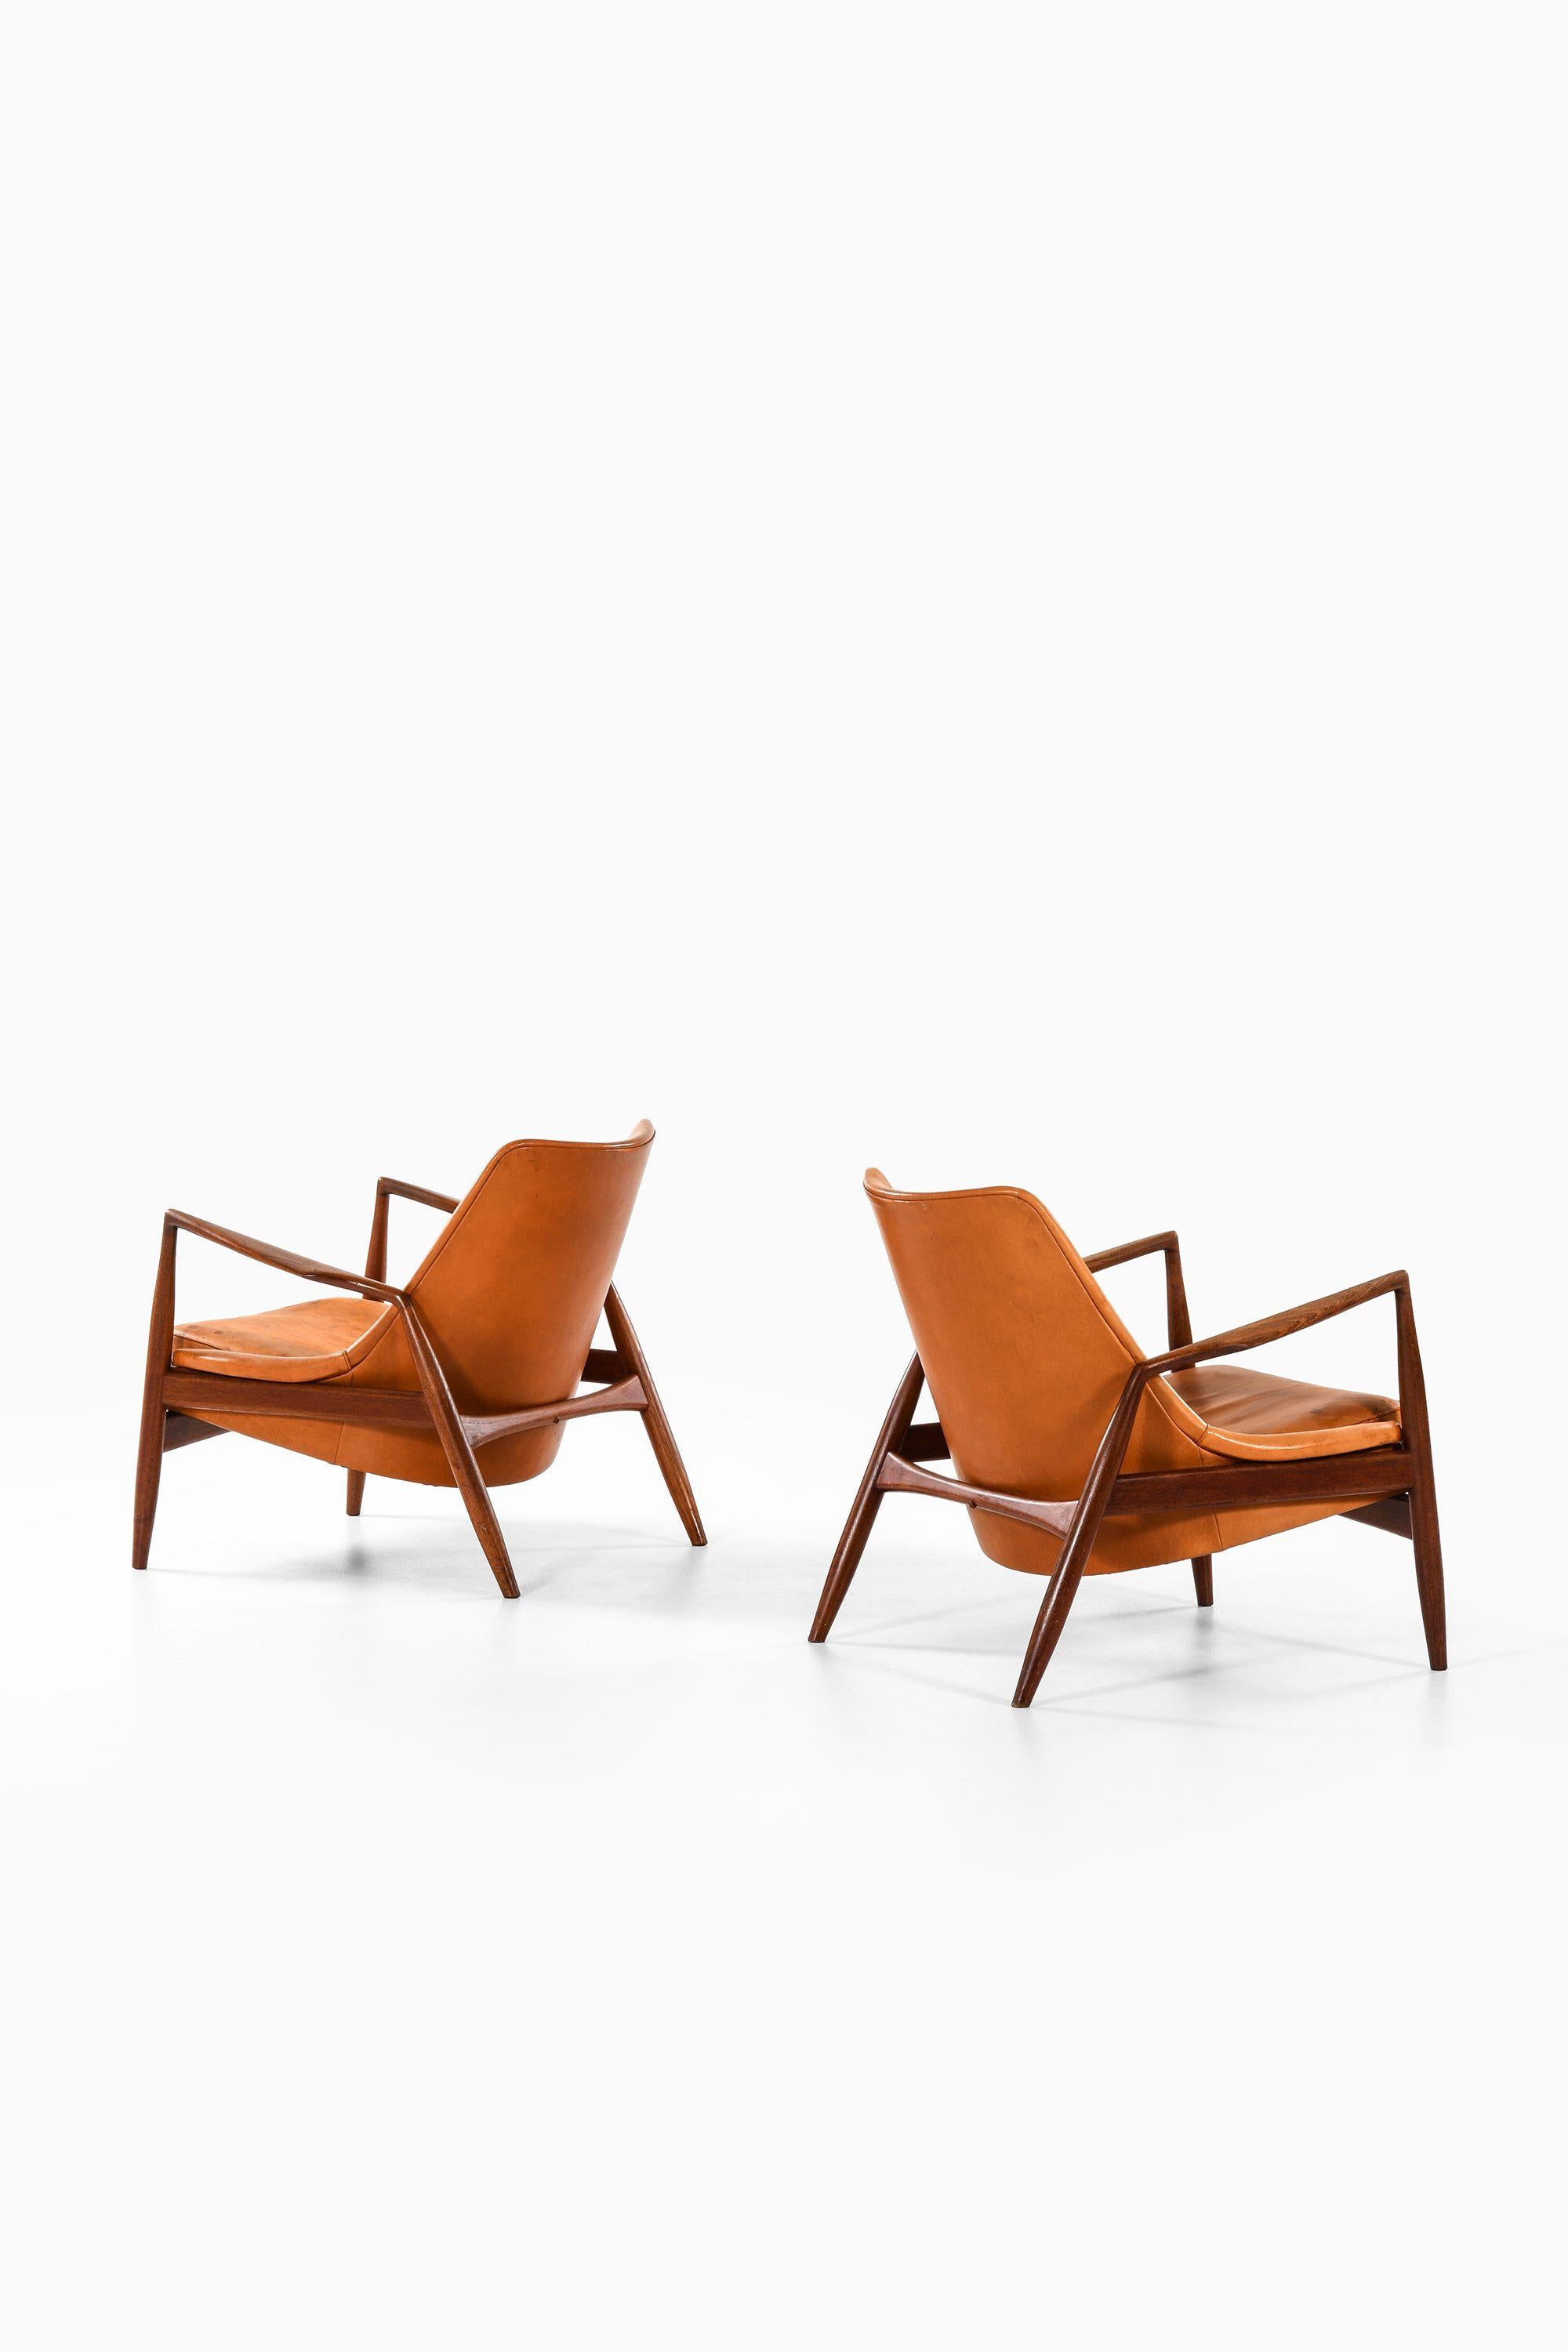 Pair of Easy Chairs in Teak and Leather by Ib Kofod-Larsen, 1950s In Good Condition For Sale In Limhamn, Skåne län